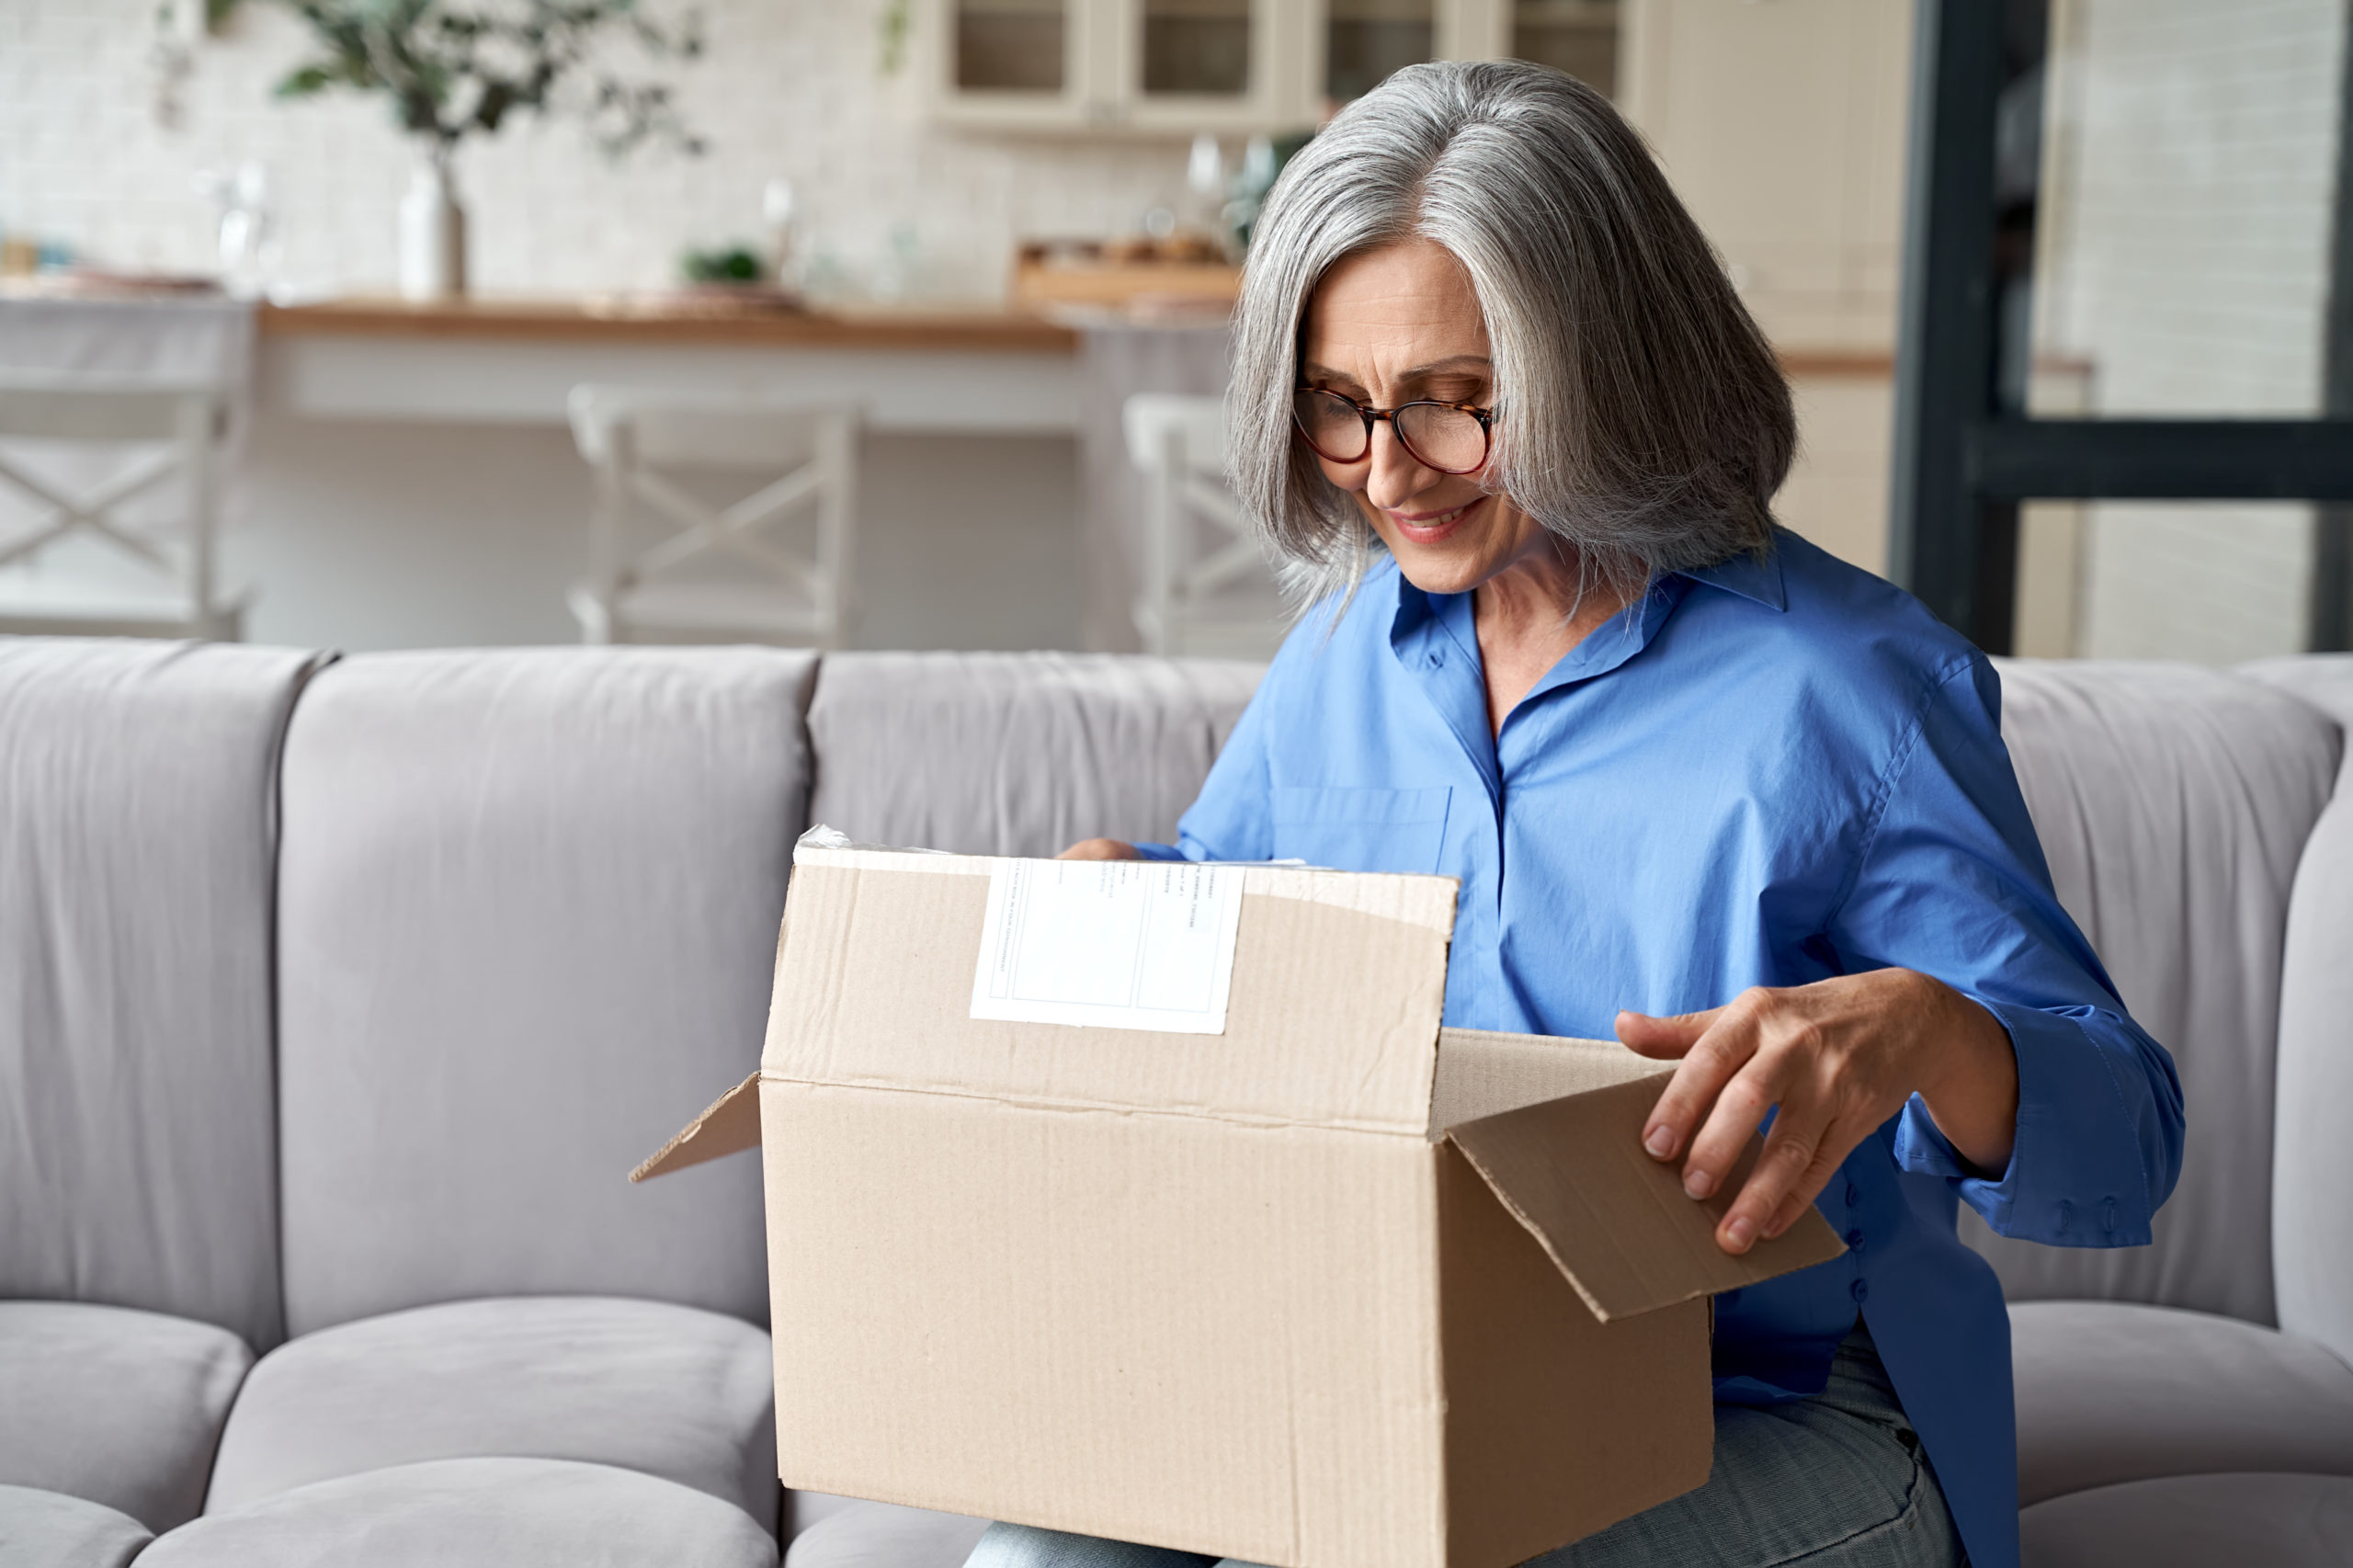 Woman unpacking parcel from an online purchase from Amazon UAE